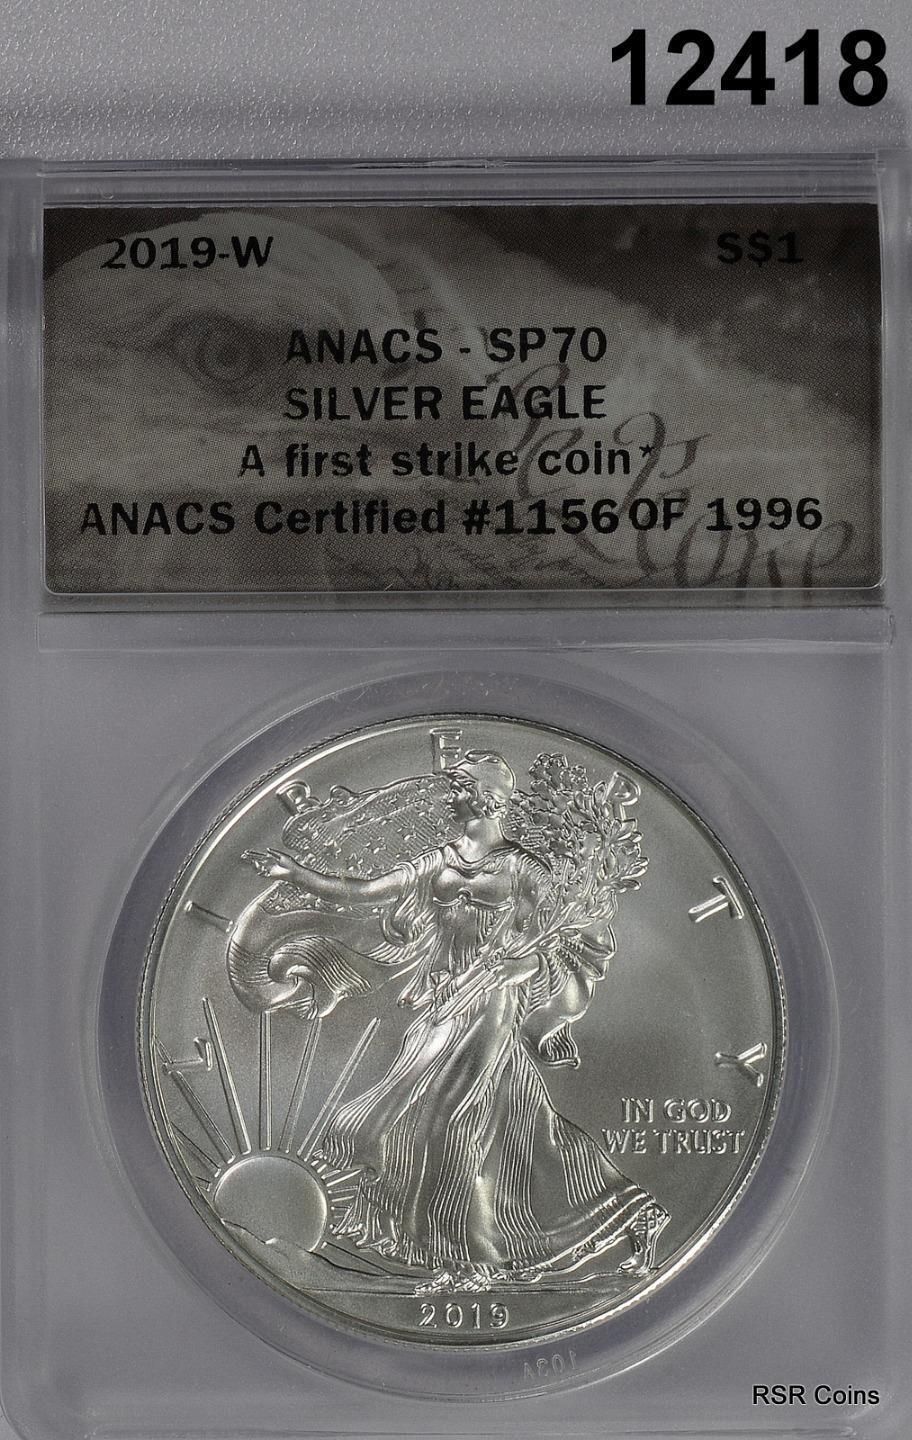 2019 W BURNISHED SILVER EAGLE ANACS CERTIFIED SP70 PERFECTION!! #12418